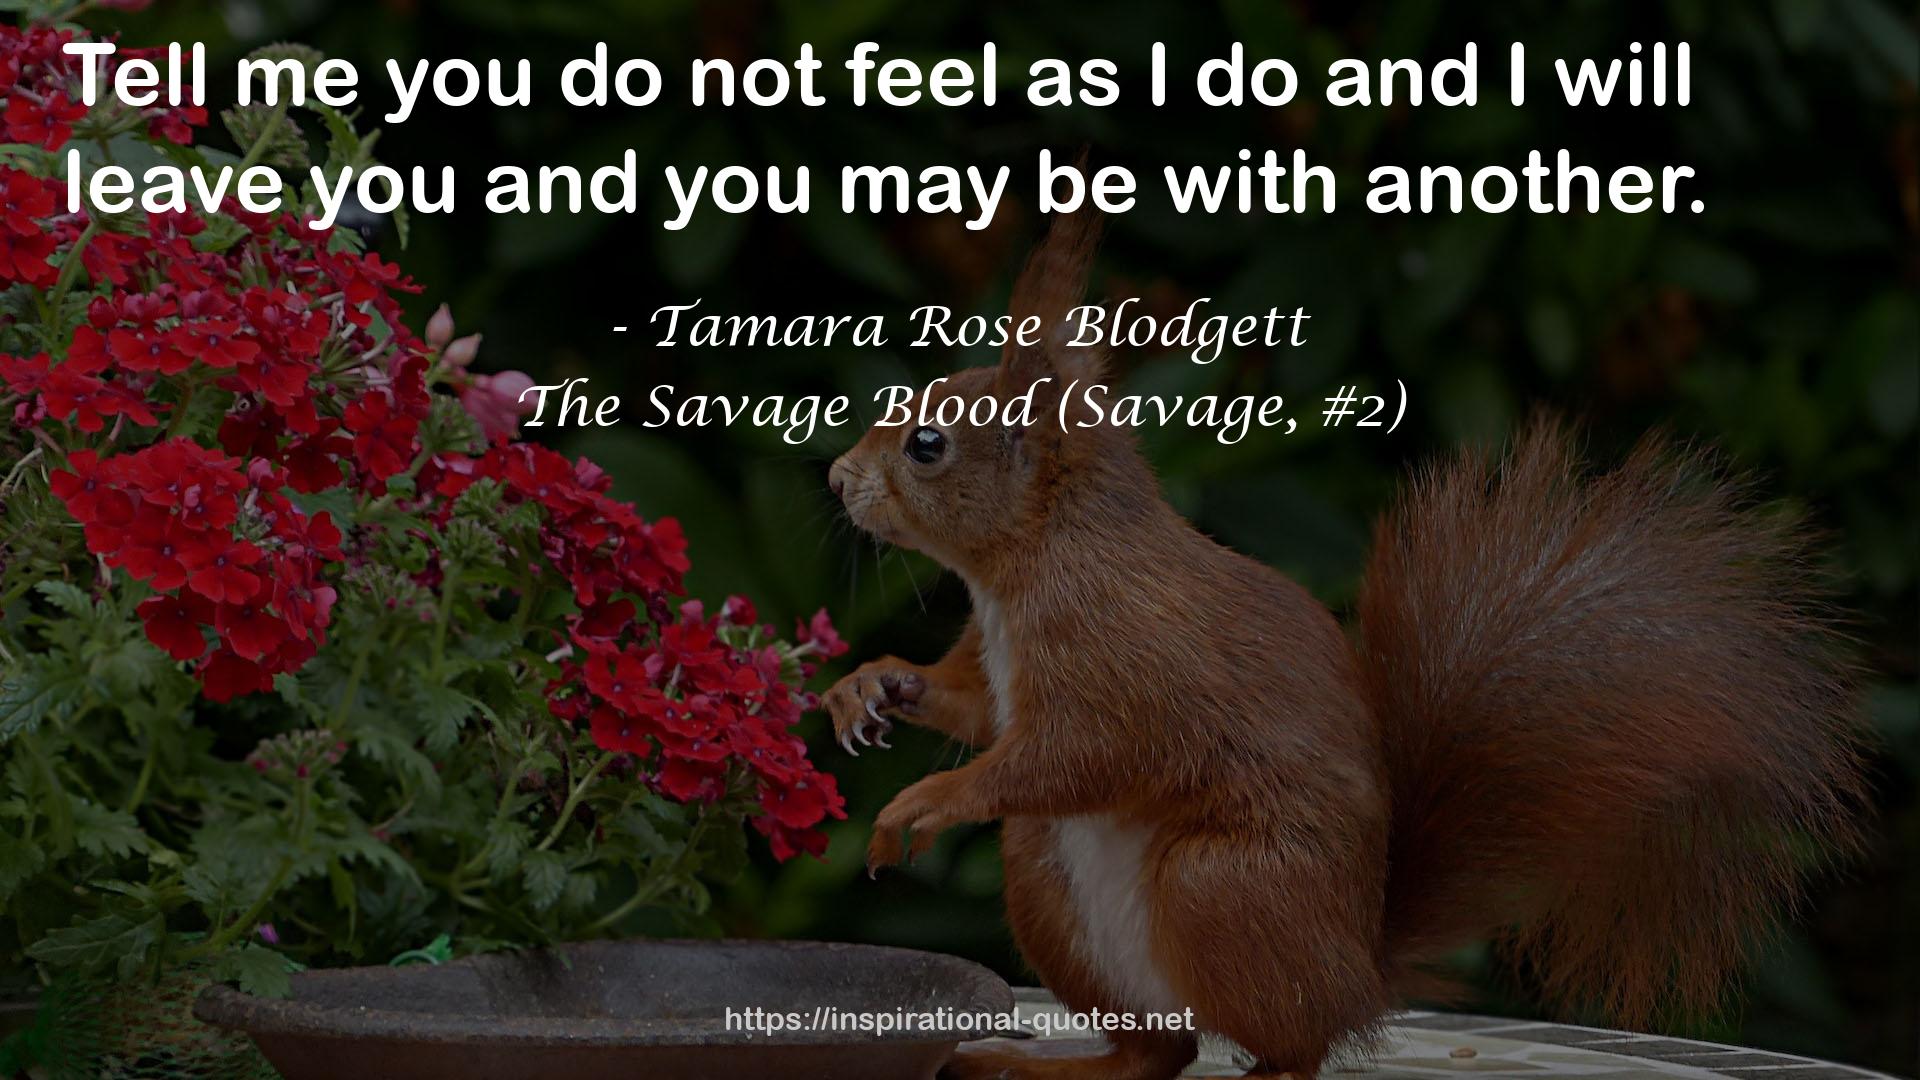 The Savage Blood (Savage, #2) QUOTES